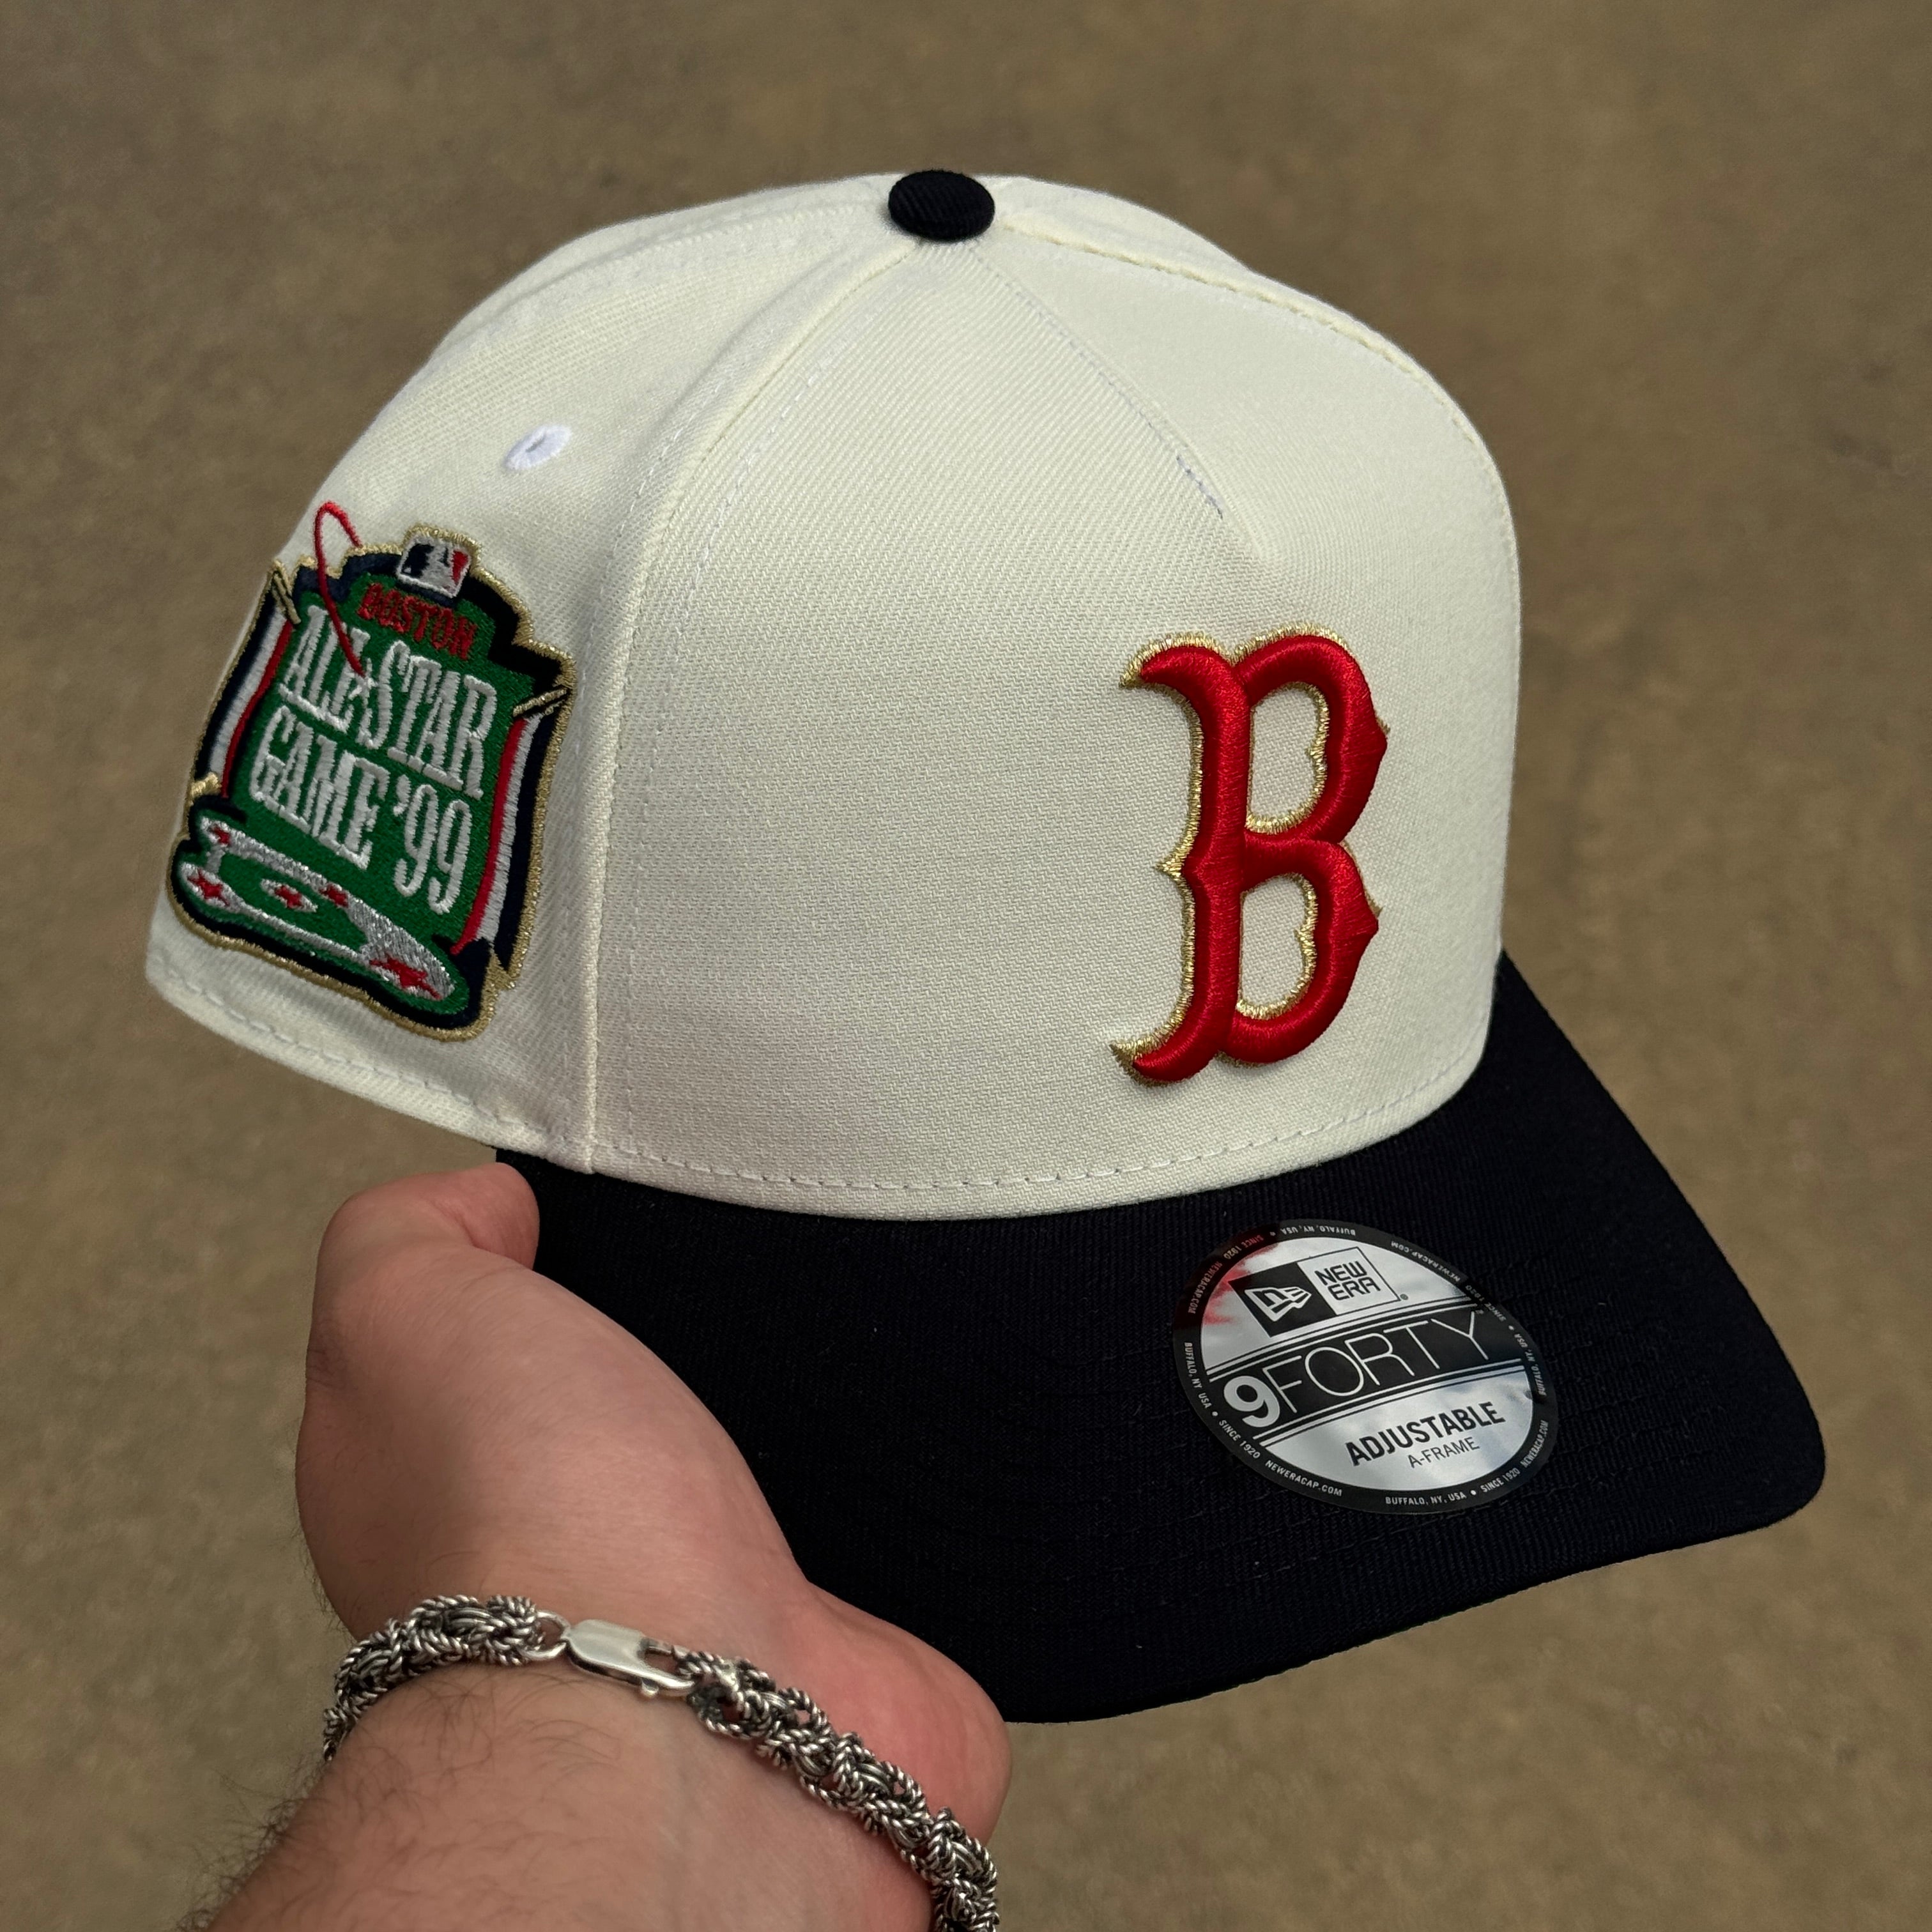 Chrome Boston Red Sox All Star Game 99 9Forty A-Frame Adjustable Strap New Era Cap Hat Sun Dad